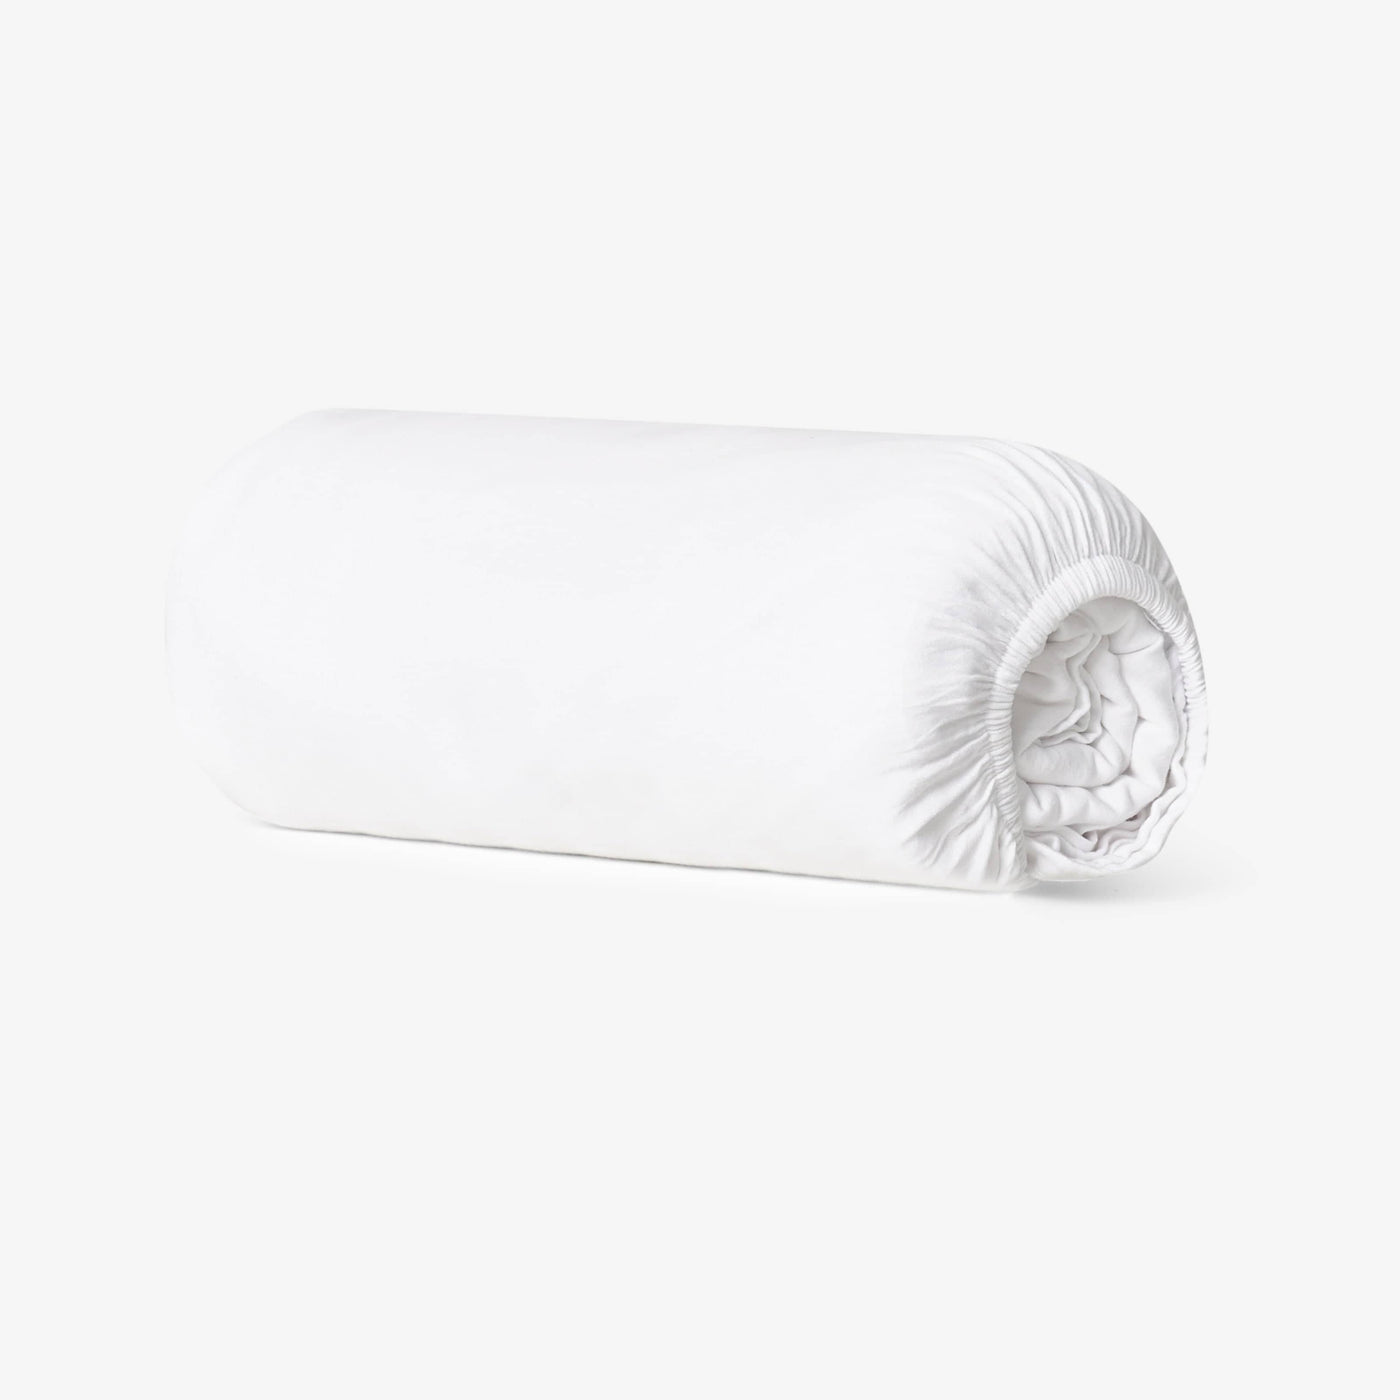 Freddie 100% Turkish Cotton 300 TC Fitted Sheet, White, Super King Size Bed Sheets sazy.com